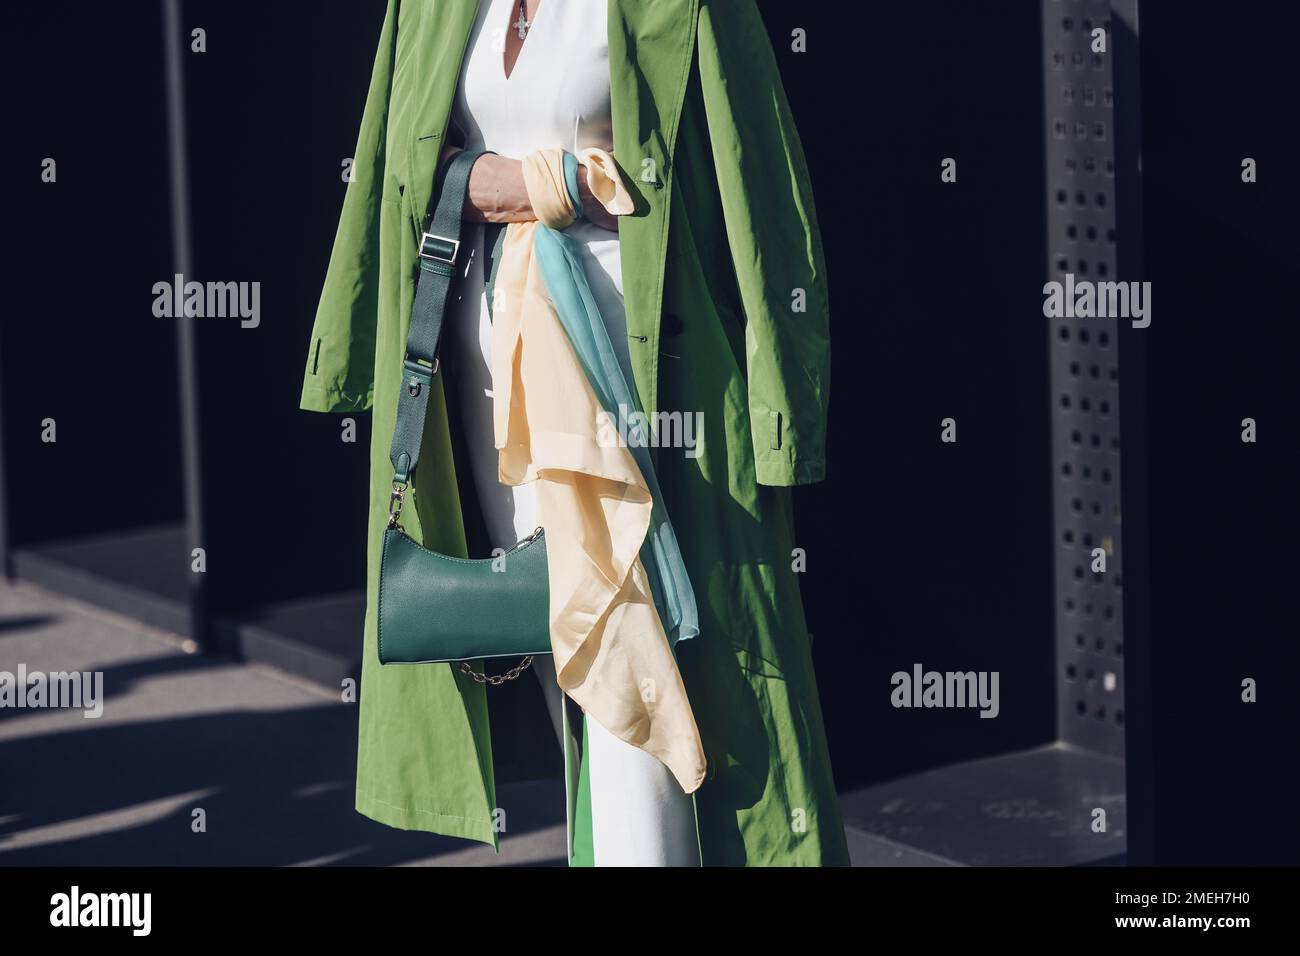 Milan, Italy - February 25, 2022: Female wearing a green coat, white dress, matching green bag and green high heels boots. Stock Photo